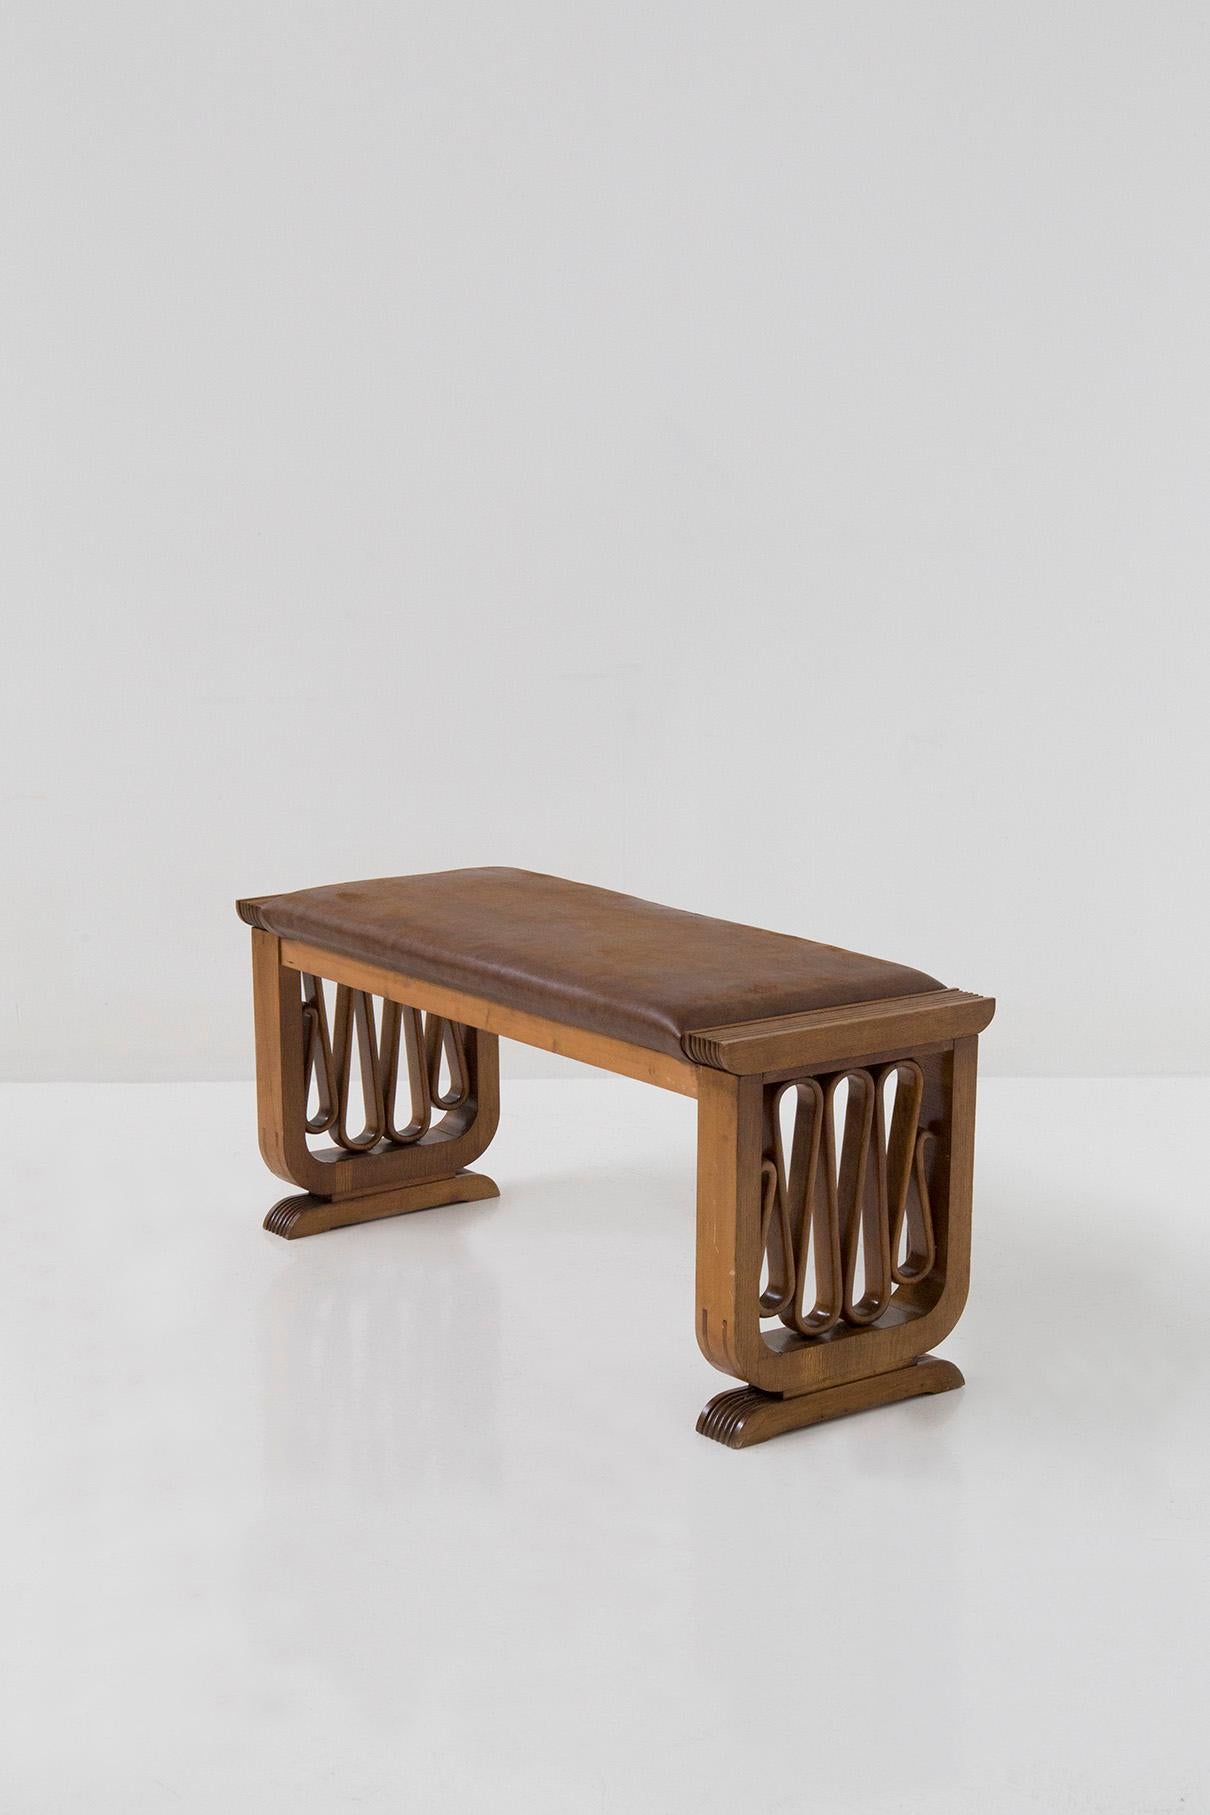 We present a charming walnut bench small attributed to the famous designer Gio Ponti, made during the extraordinary era of the 1940s and 1950s. This exquisite piece of furniture has been meticulously handcrafted from precious woods, displaying the